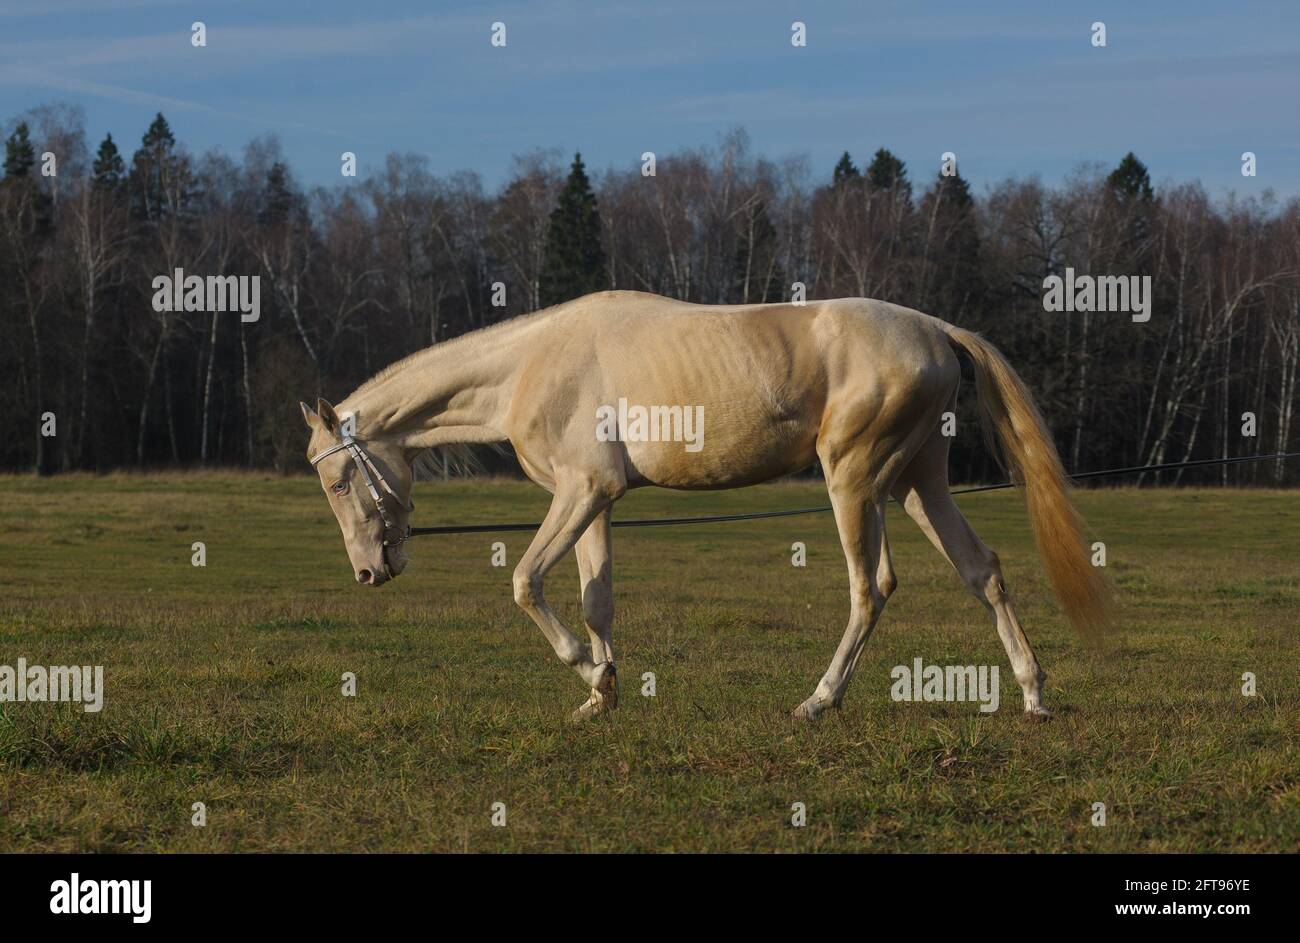 Beautiful akhal-teke horse on a cord being trained in the fields Stock Photo